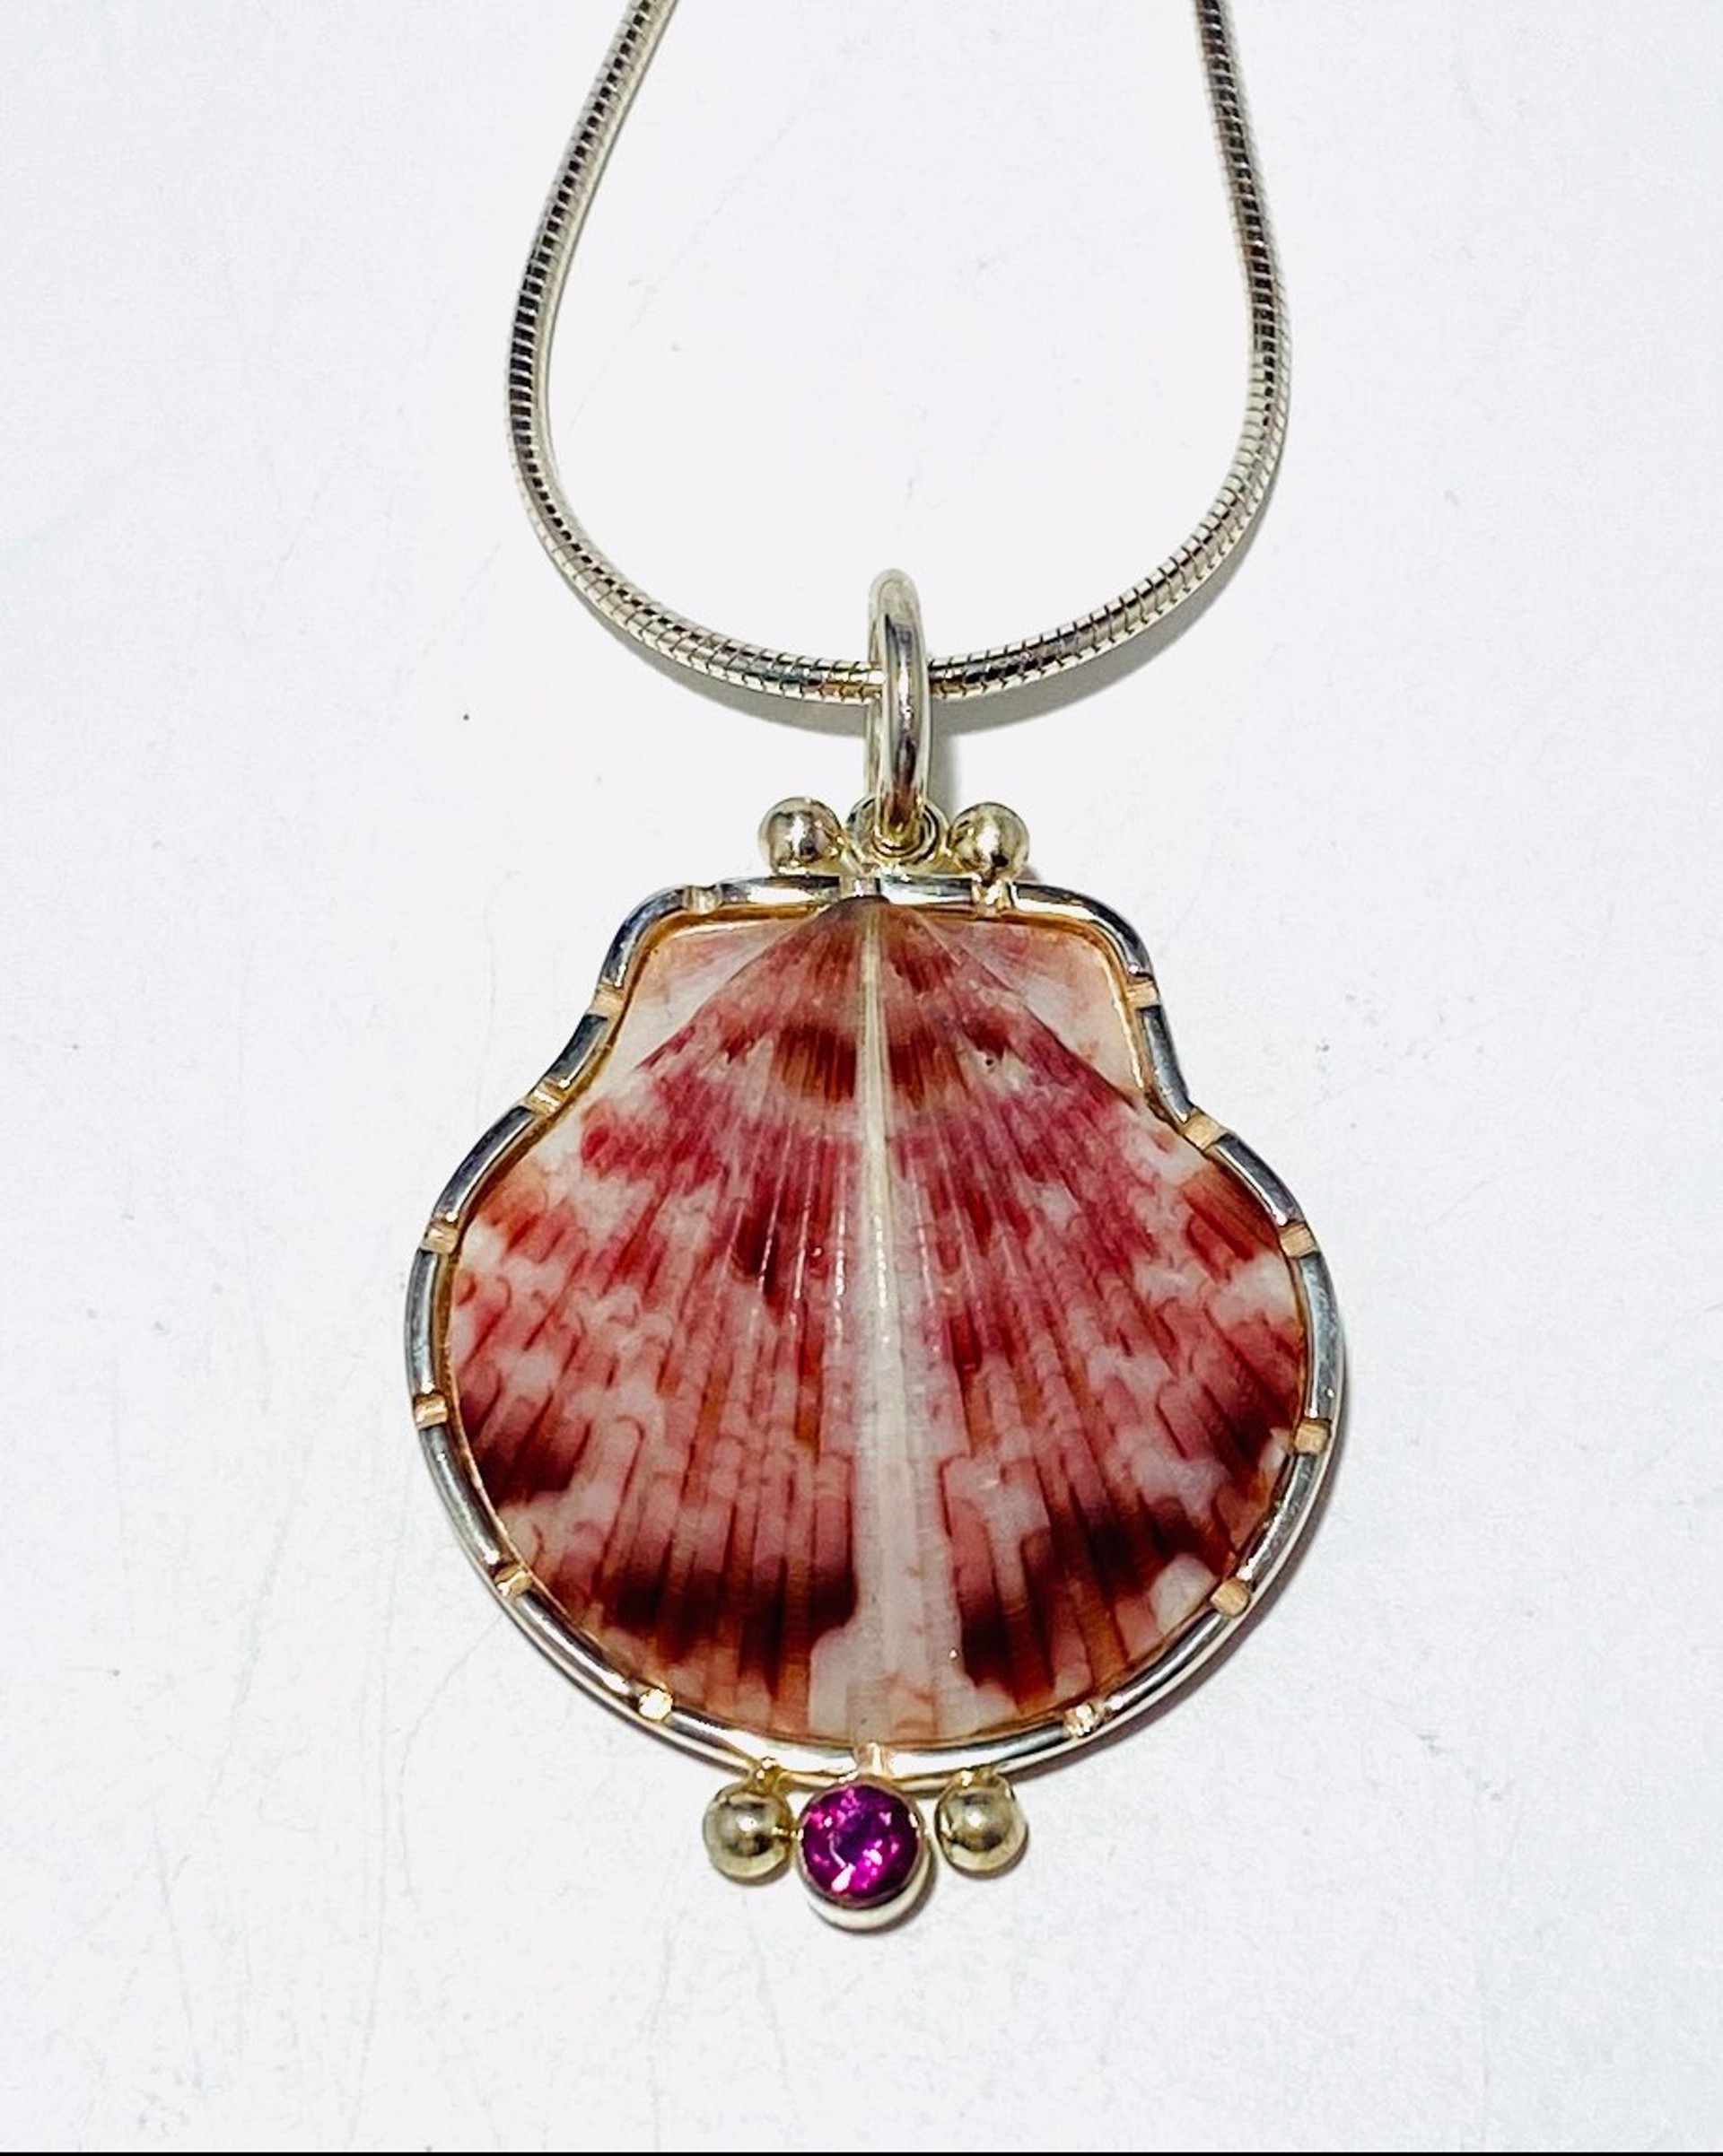 Calico Scallop Shell With Rhodolite Garnet Pendant on 18"Italian Silver Omega Chain Necklace by Barbara Umbel